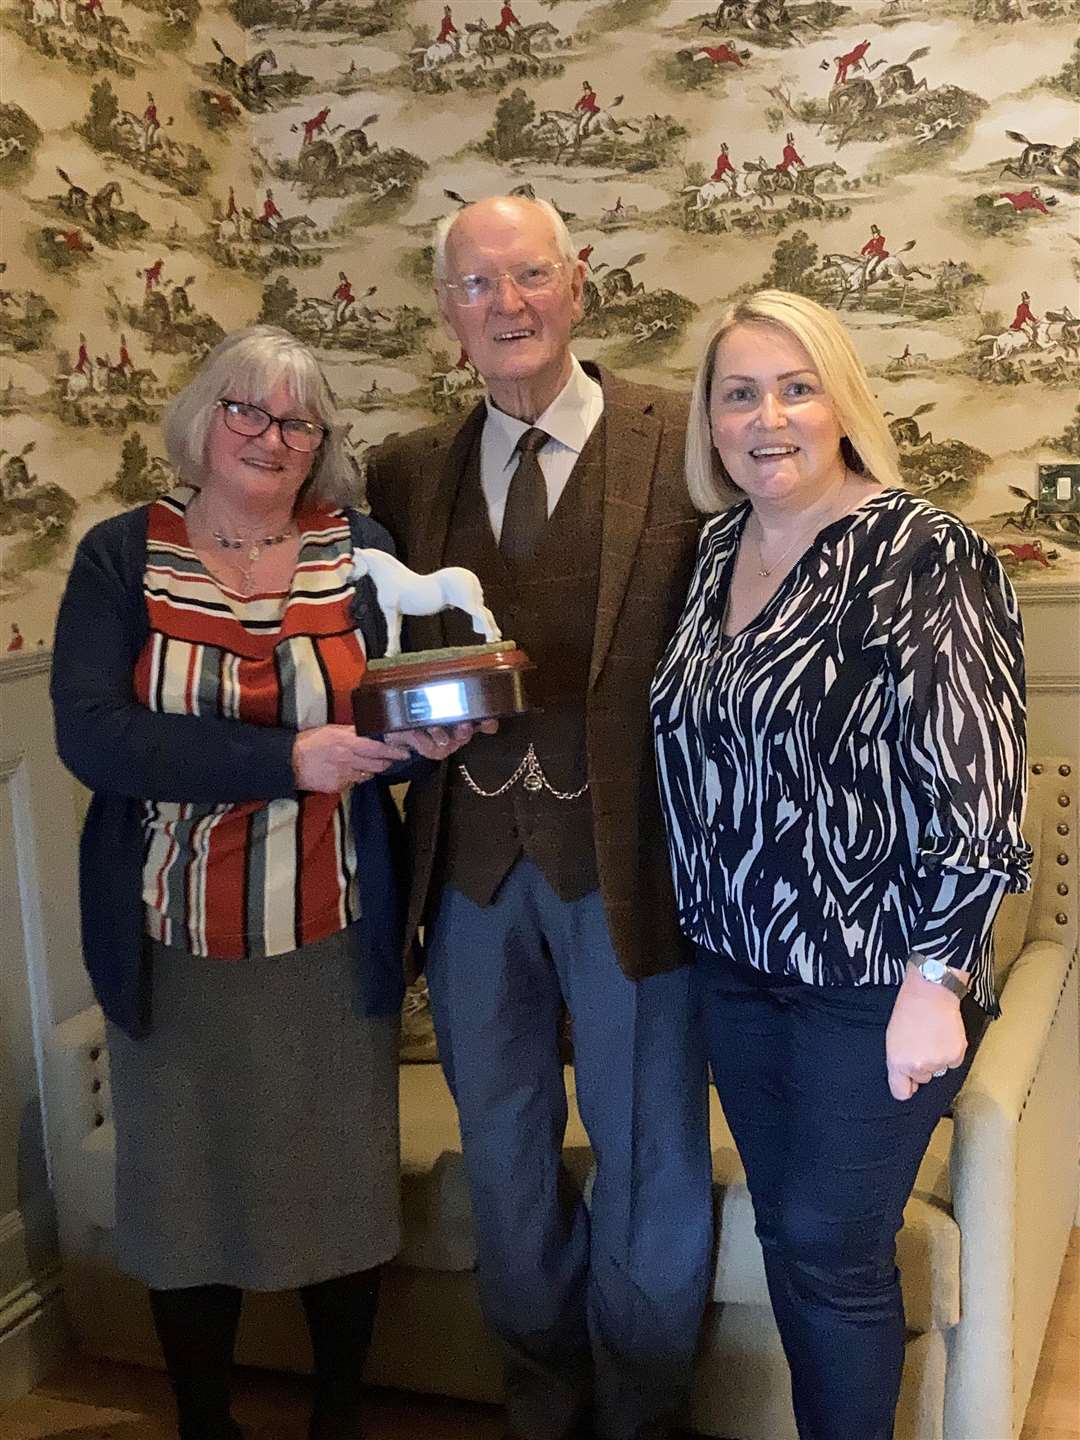 Volunteer Irene Morris (left) received the Bambi award for being a dedicated helper from Jimmy Johnston one of the group's trustees along with chairperson Judith Miller on the right.